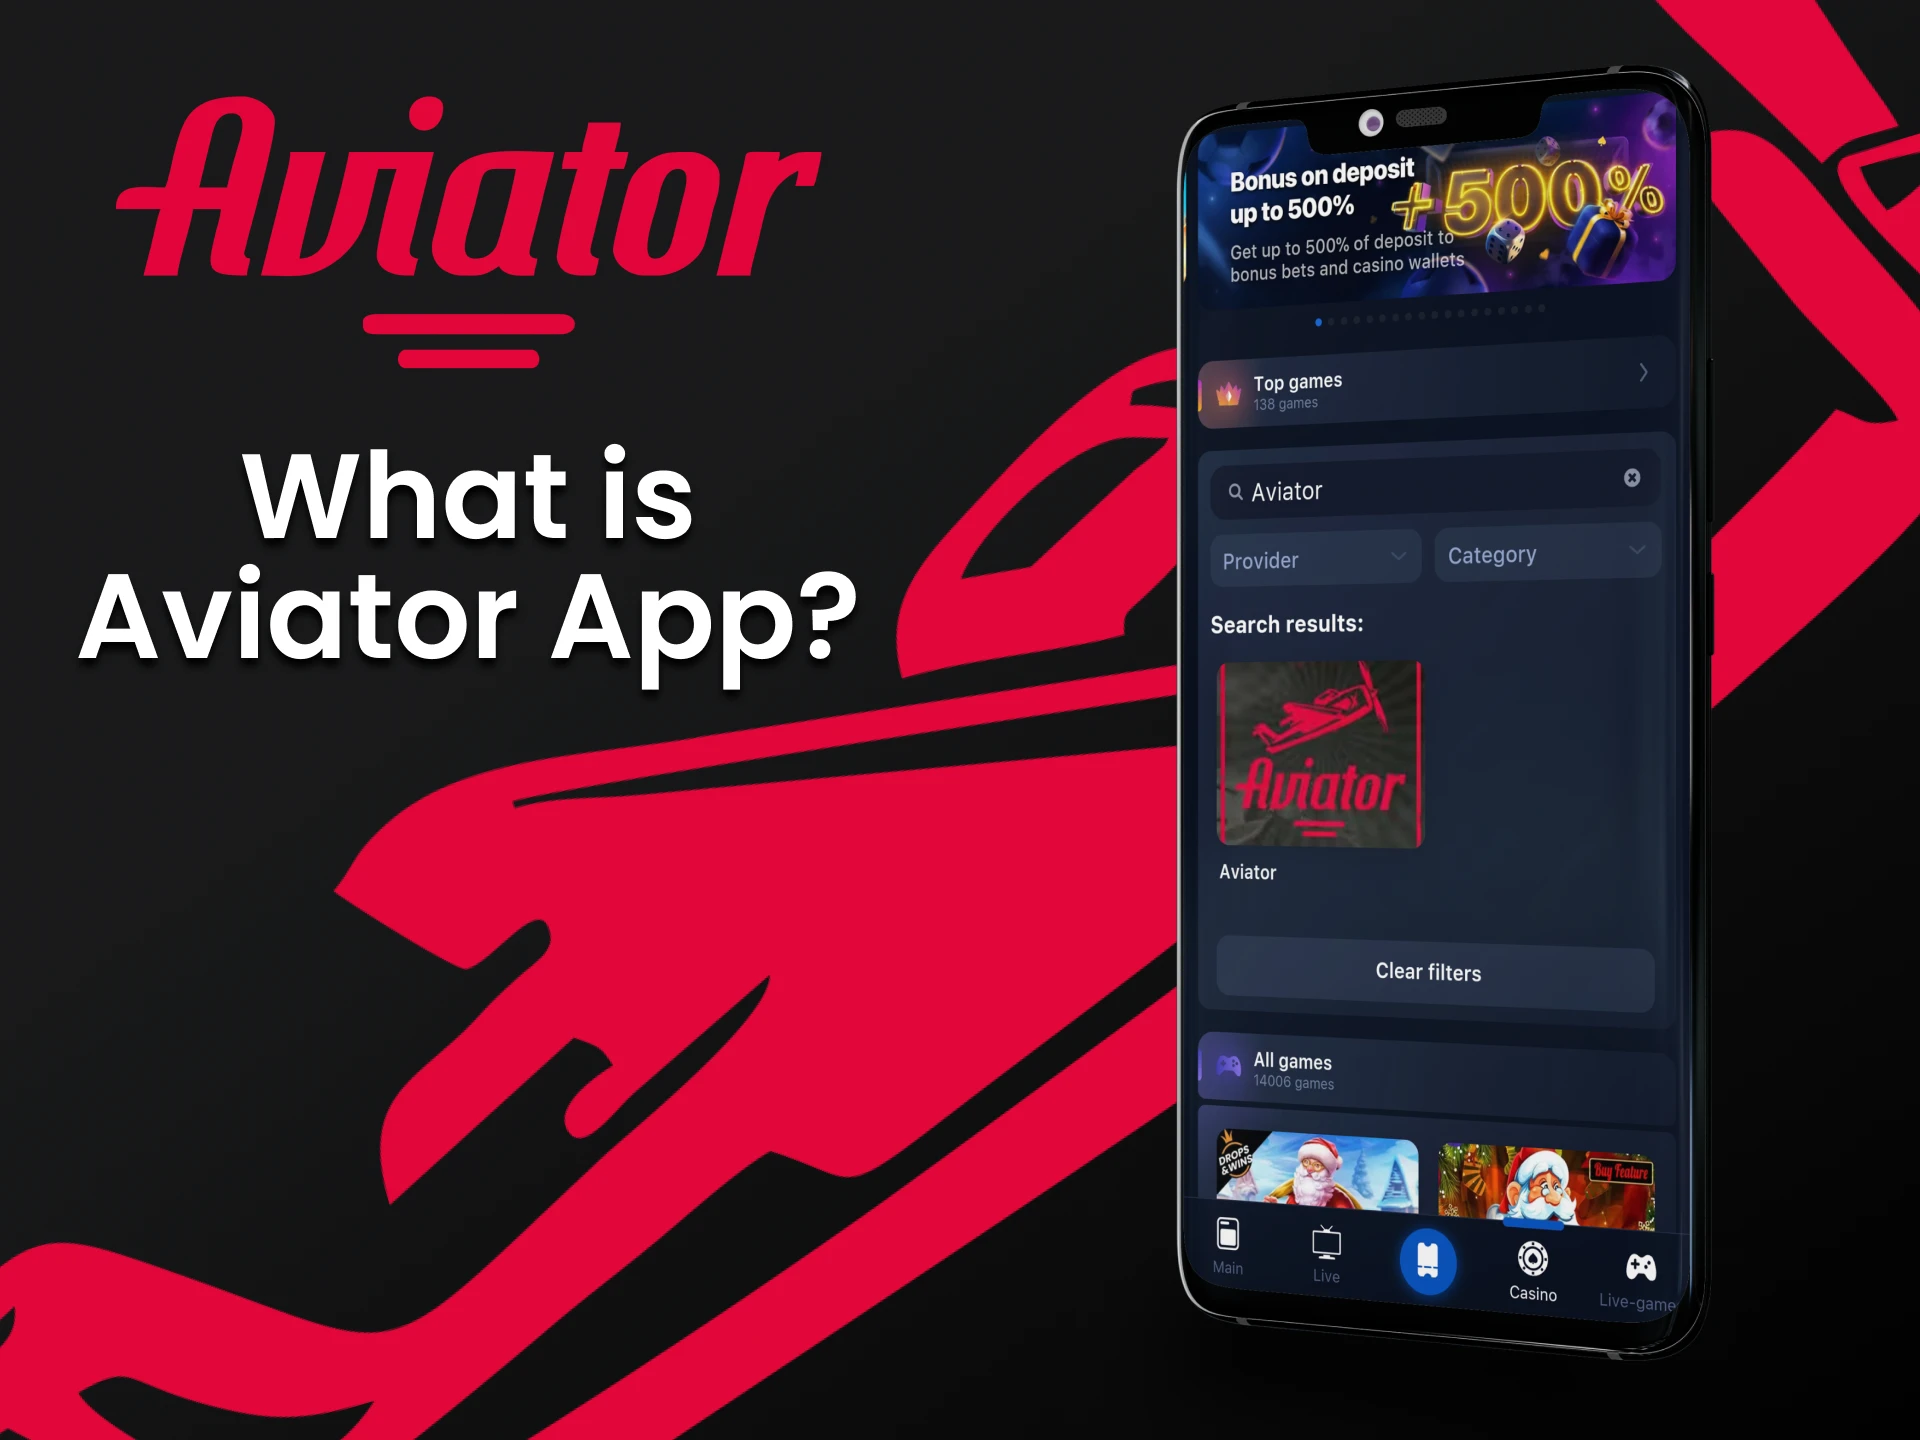 To start playing Aviator on your phone, you need to download the app.